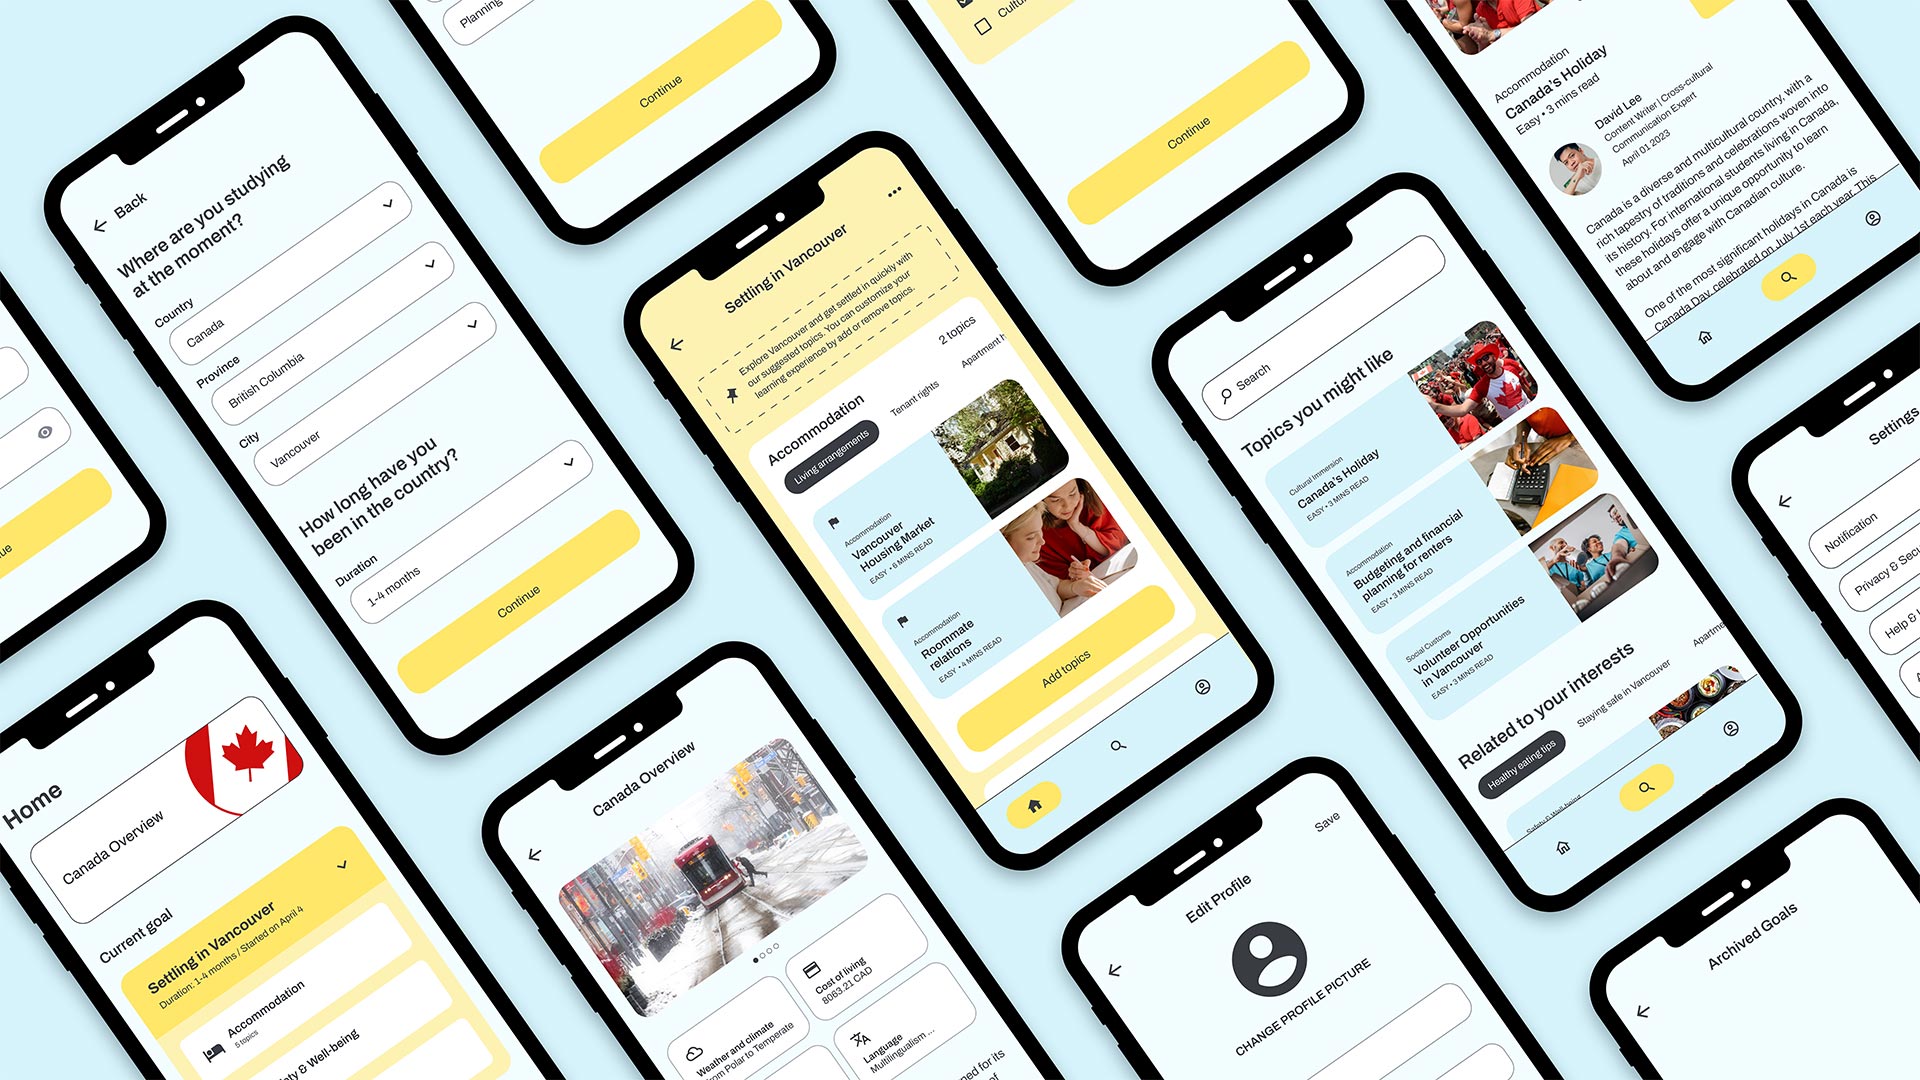 Multiple iPhone mock-up screens for the Roam app, shown in an isometric grid.